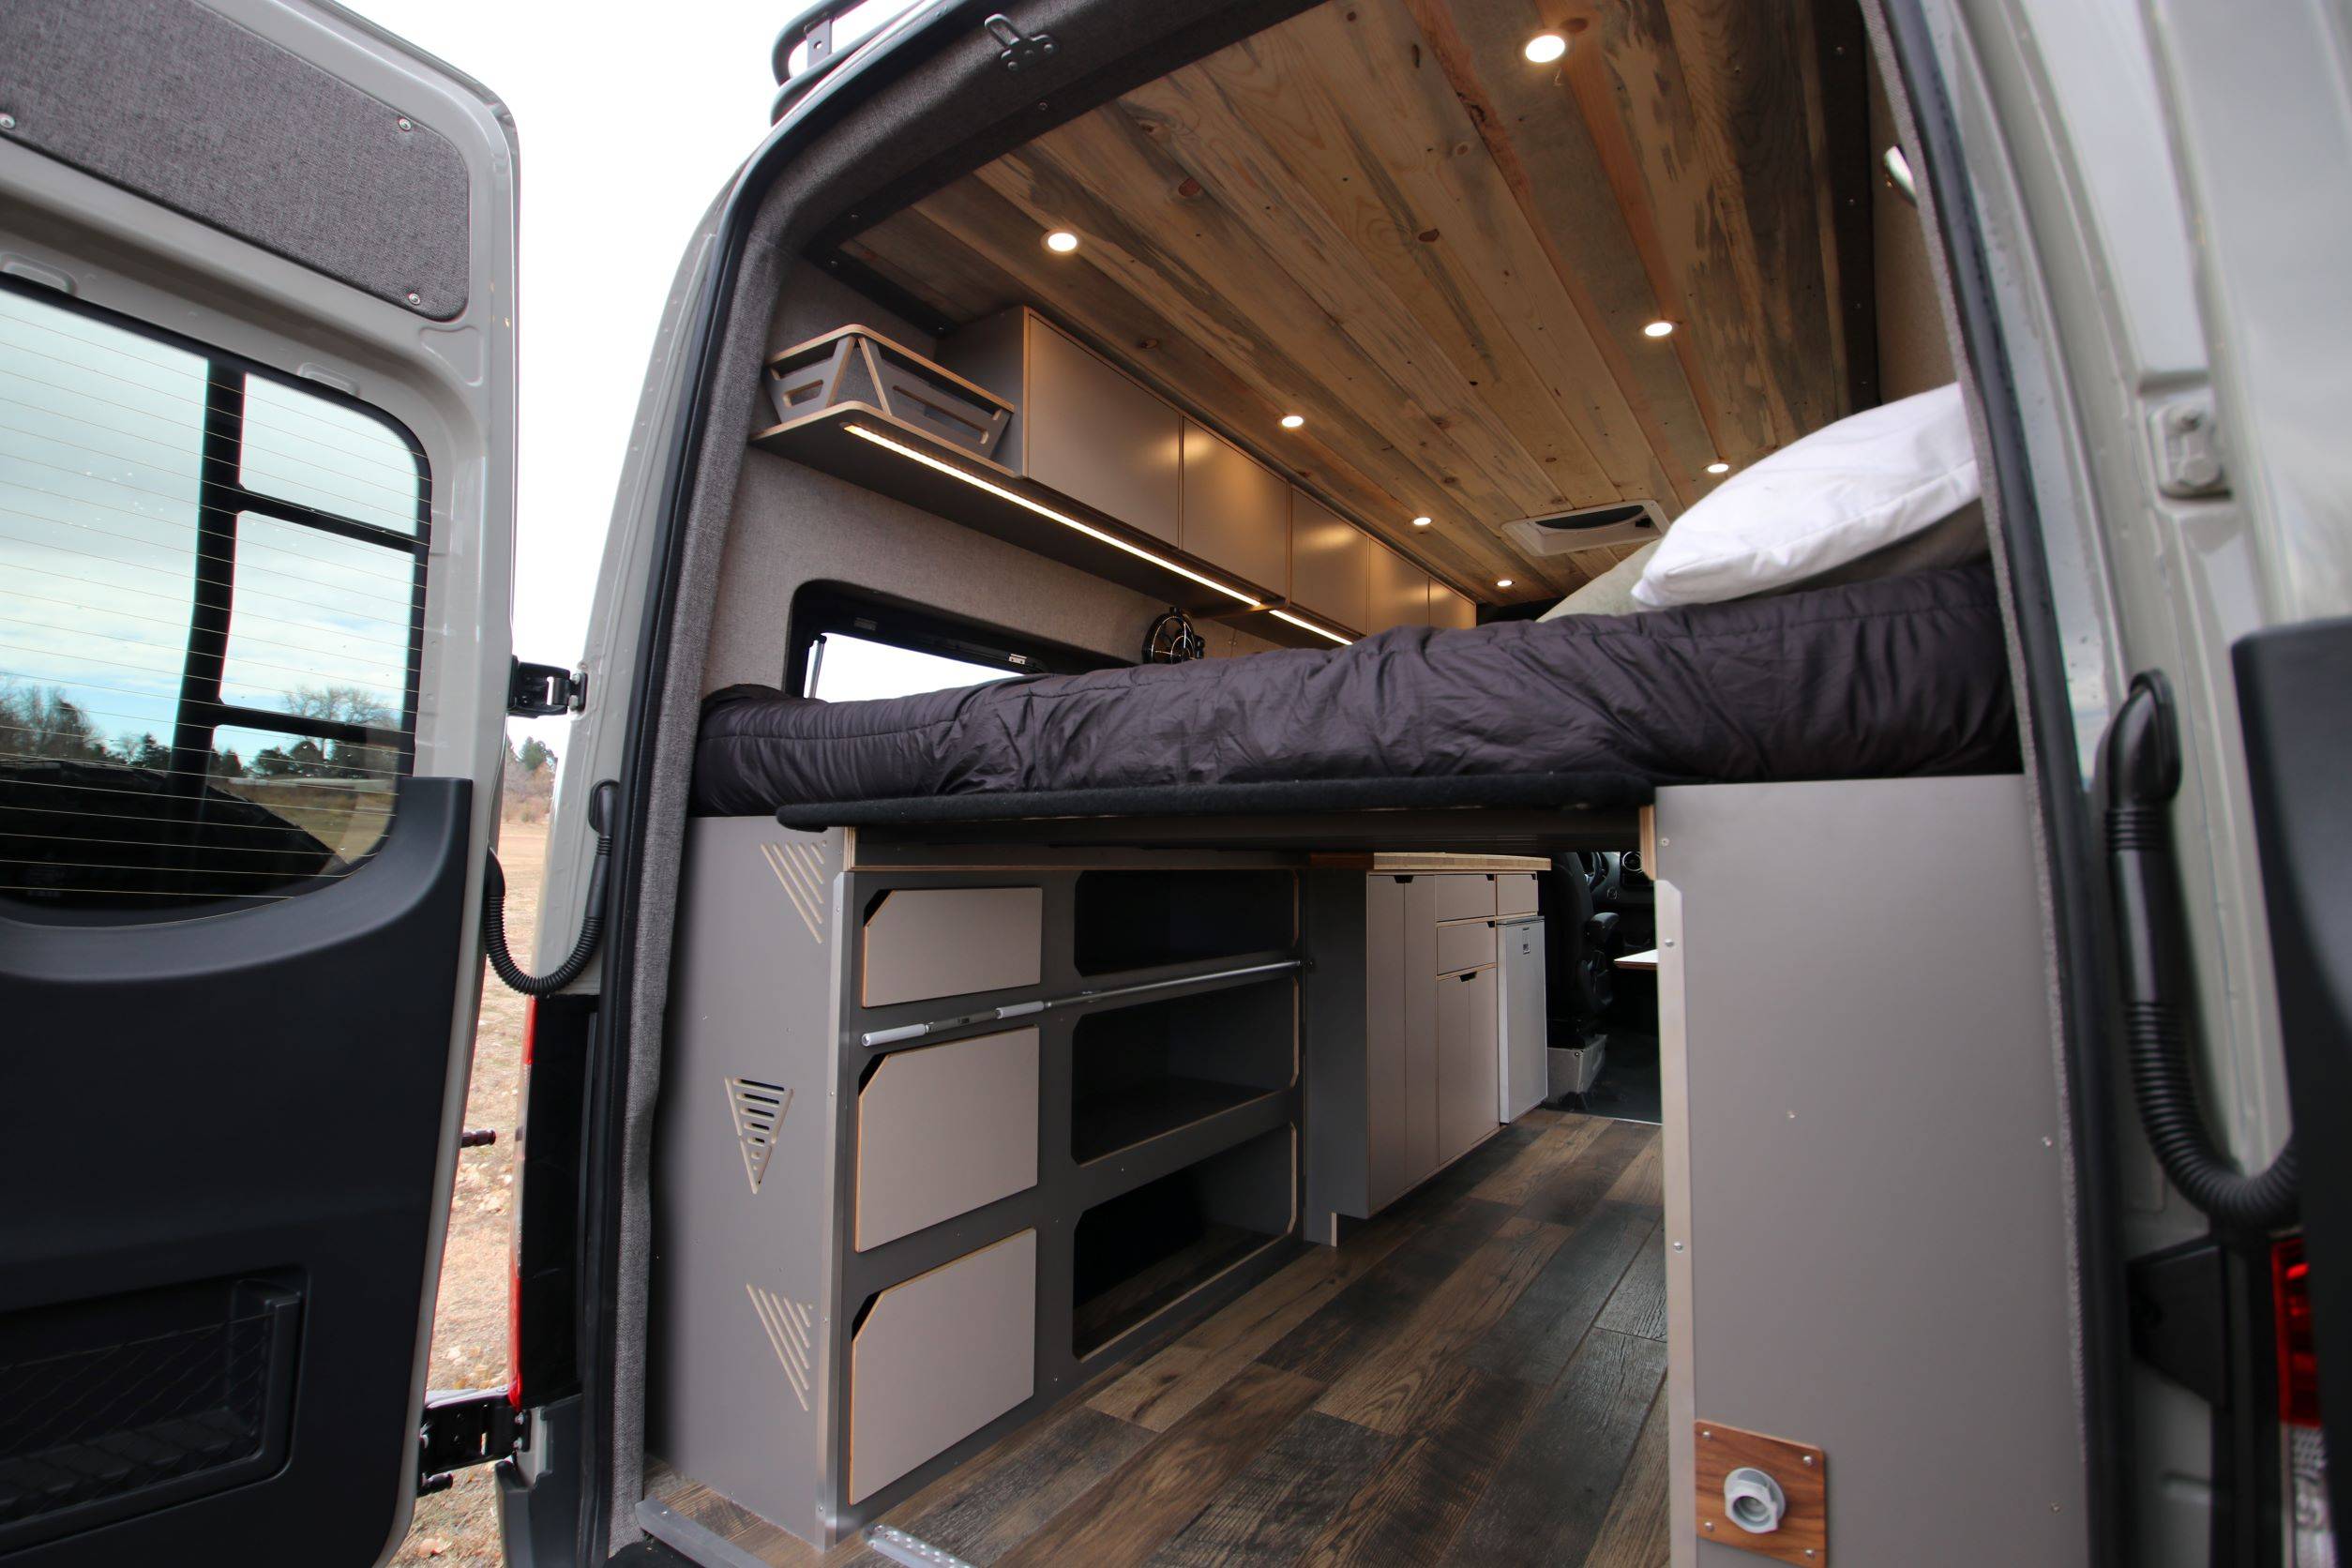 Rack & Roll - Sprinter 144 Conversion Van - Man in Under-Bed Storage Area with Shelves - The Vansmith